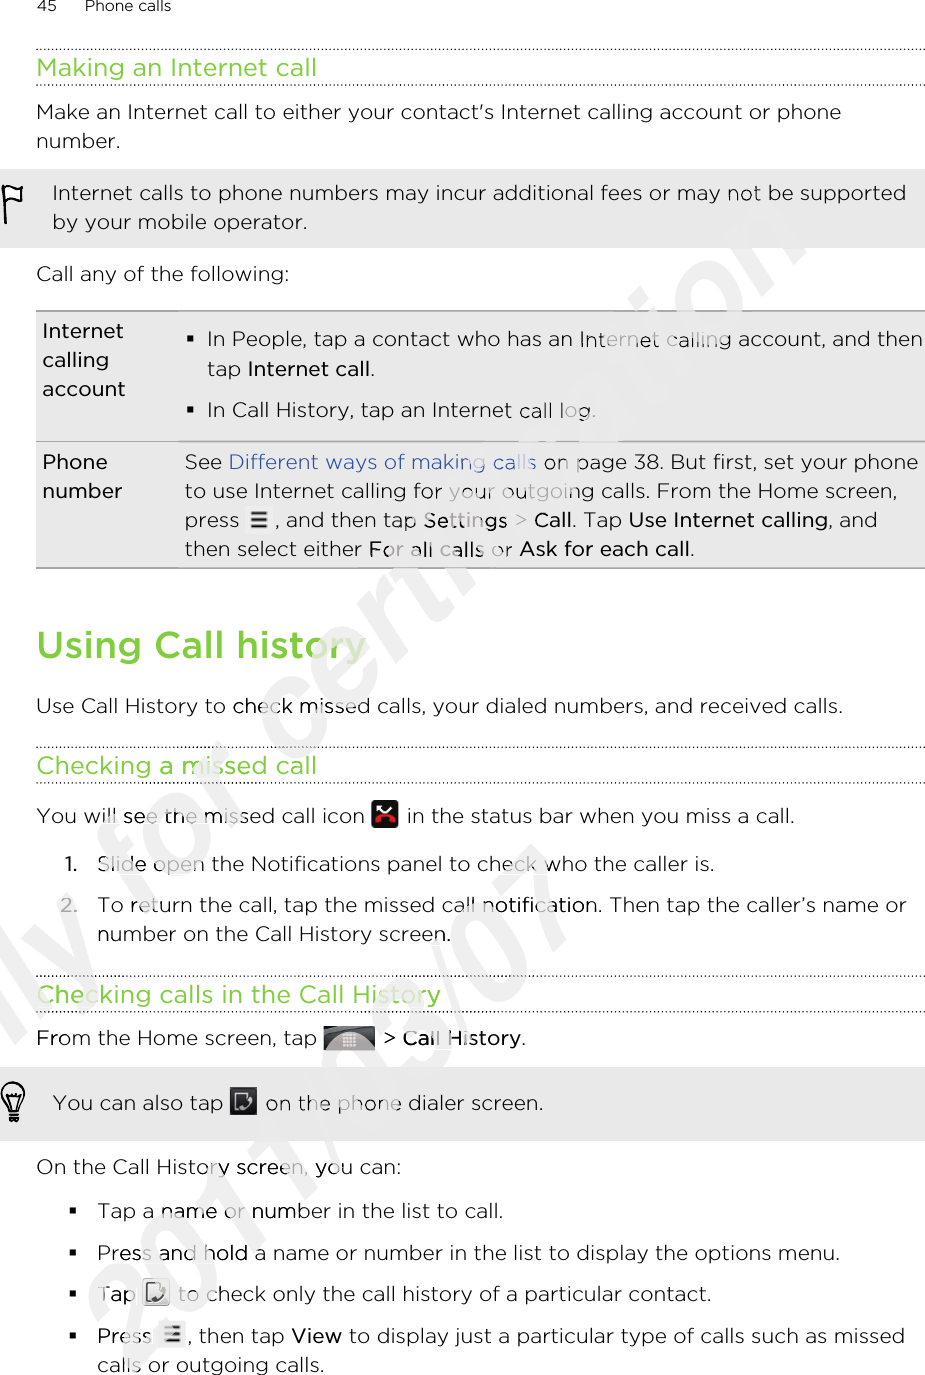 Making an Internet callMake an Internet call to either your contact&apos;s Internet calling account or phonenumber.Internet calls to phone numbers may incur additional fees or may not be supportedby your mobile operator.Call any of the following:Internetcallingaccount§In People, tap a contact who has an Internet calling account, and thentap Internet call.§In Call History, tap an Internet call log.PhonenumberSee Different ways of making calls on page 38. But first, set your phoneto use Internet calling for your outgoing calls. From the Home screen,press  , and then tap Settings &gt; Call. Tap Use Internet calling, andthen select either For all calls or Ask for each call.Using Call historyUse Call History to check missed calls, your dialed numbers, and received calls.Checking a missed callYou will see the missed call icon   in the status bar when you miss a call.1. Slide open the Notifications panel to check who the caller is.2. To return the call, tap the missed call notification. Then tap the caller’s name ornumber on the Call History screen.Checking calls in the Call HistoryFrom the Home screen, tap   &gt; Call History. You can also tap   on the phone dialer screen.On the Call History screen, you can:§Tap a name or number in the list to call.§Press and hold a name or number in the list to display the options menu.§Tap   to check only the call history of a particular contact.§Press  , then tap View to display just a particular type of calls such as missedcalls or outgoing calls.45 Phone callsOnly 2.Only 2.number on the Call History screen.Only number on the Call History screen.Checking calls in the Call HistoryOnly Checking calls in the Call HistoryOnly Only From the Home screen, tap Only From the Home screen, tap Only Only Only for Checking a missed callfor Checking a missed callfor for You will see the missed call icon for You will see the missed call icon Slide open the Notifications panel to check who the caller is.for Slide open the Notifications panel to check who the caller is.To return the call, tap the missed call notification. Then tap the caller’s name orfor To return the call, tap the missed call notification. Then tap the caller’s name orcertification certification Internet calls to phone numbers may incur additional fees or may not be supportedcertification Internet calls to phone numbers may incur additional fees or may not be supportedcertification In People, tap a contact who has an Internet calling account, and thencertification In People, tap a contact who has an Internet calling account, and thenIn Call History, tap an Internet call log.certification In Call History, tap an Internet call log.Different ways of making callscertification Different ways of making calls on page 38. But first, set your phonecertification  on page 38. But first, set your phoneto use Internet calling for your outgoing calls. From the Home screen,certification to use Internet calling for your outgoing calls. From the Home screen,, and then tap certification , and then tap Settingscertification Settings &gt; certification  &gt; Callcertification CallFor all callscertification For all calls or certification  or Ask for each callcertification Ask for each callcertification certification certification Using Call historycertification Using Call historyUse Call History to check missed calls, your dialed numbers, and received calls.certification Use Call History to check missed calls, your dialed numbers, and received calls.Checking a missed callcertification Checking a missed callcertification 2011/03/07Slide open the Notifications panel to check who the caller is.2011/03/07Slide open the Notifications panel to check who the caller is.To return the call, tap the missed call notification. Then tap the caller’s name or2011/03/07To return the call, tap the missed call notification. Then tap the caller’s name ornumber on the Call History screen.2011/03/07number on the Call History screen.Checking calls in the Call History2011/03/07Checking calls in the Call History2011/03/072011/03/072011/03/07 &gt; 2011/03/07 &gt; Call History2011/03/07Call History2011/03/072011/03/072011/03/072011/03/07 on the phone dialer screen.2011/03/07 on the phone dialer screen.On the Call History screen, you can:2011/03/07On the Call History screen, you can:Tap a name or number in the list to call.2011/03/07Tap a name or number in the list to call.Press and hold a name or number in the list to display the options menu.2011/03/07Press and hold a name or number in the list to display the options menu.§2011/03/07§Tap 2011/03/07Tap 2011/03/07 to check only the call history of a particular contact.2011/03/07 to check only the call history of a particular contact.Press 2011/03/07Press 2011/03/07calls or outgoing calls.2011/03/07calls or outgoing calls.